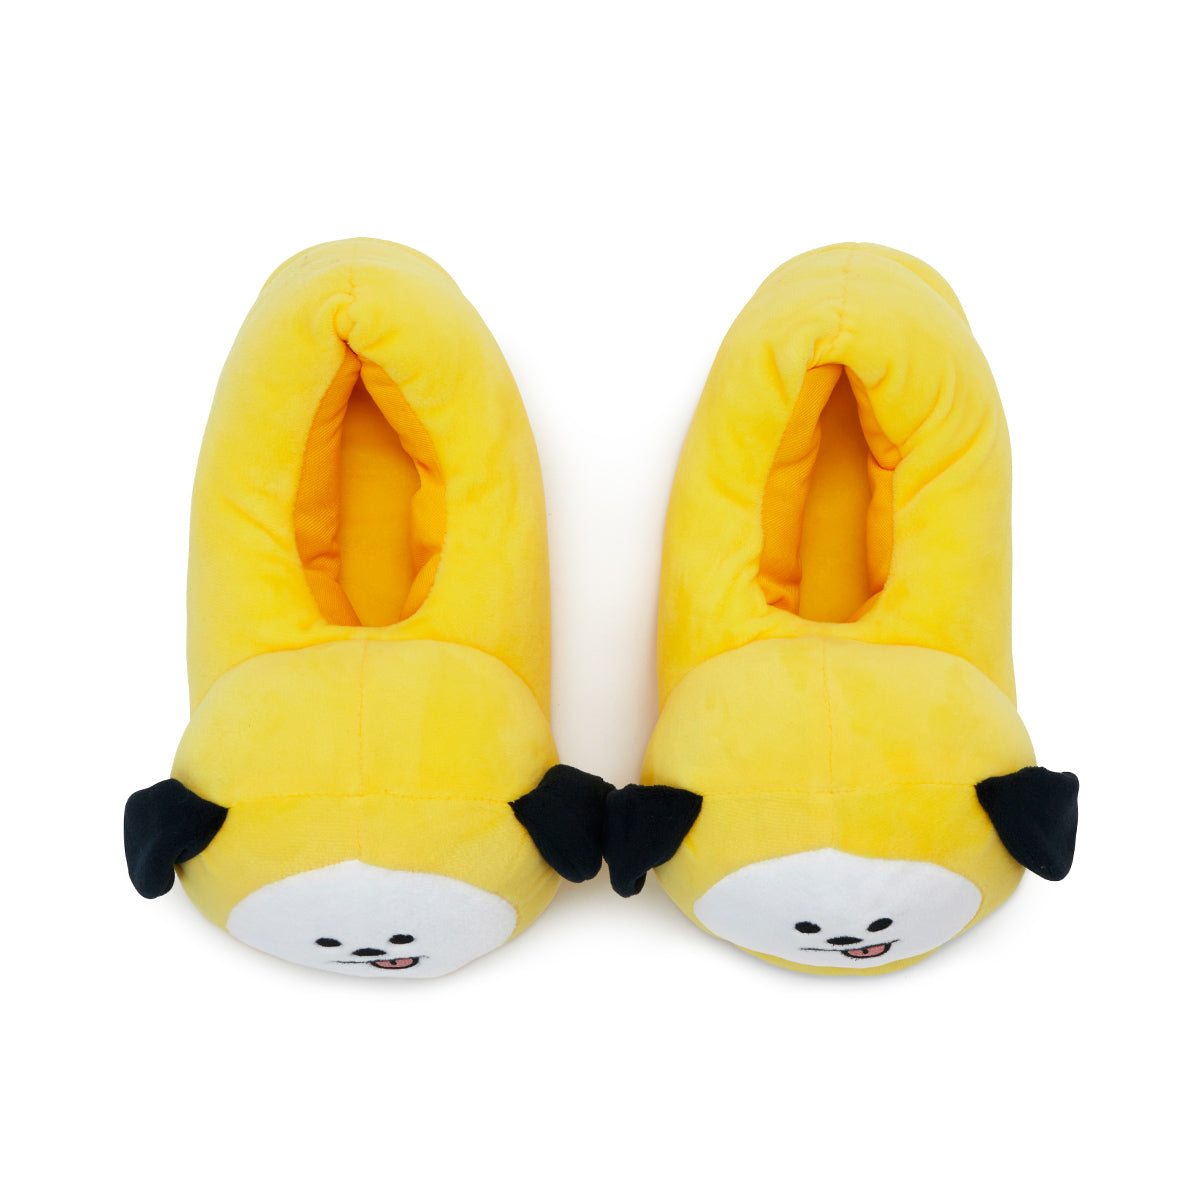 BT21 - Character Room Slippers - CHIMMY 